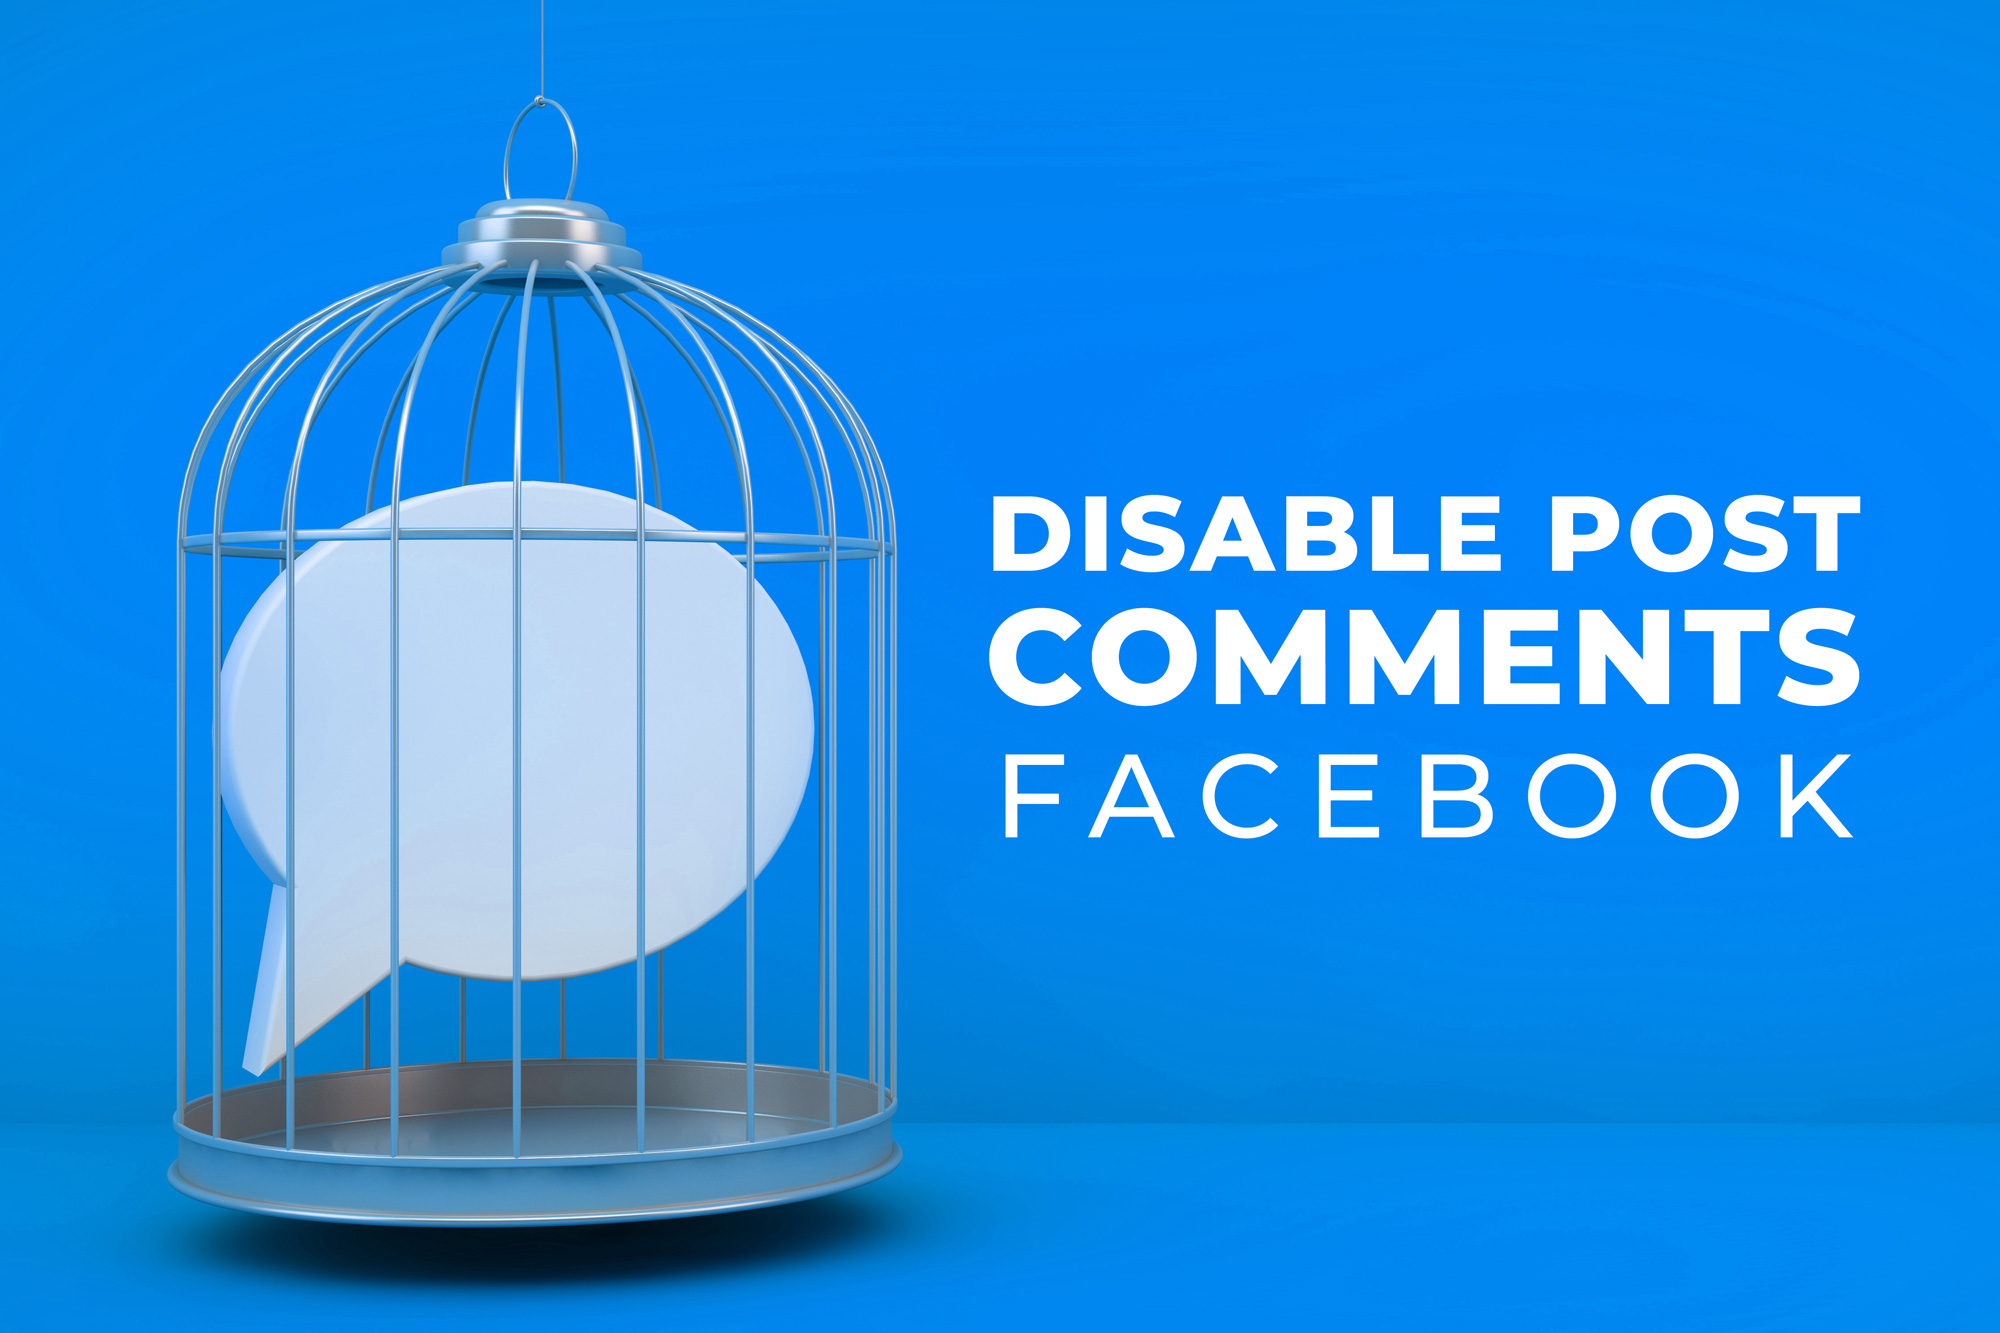 How to Turn Off or Disable Comments on a Facebook Post